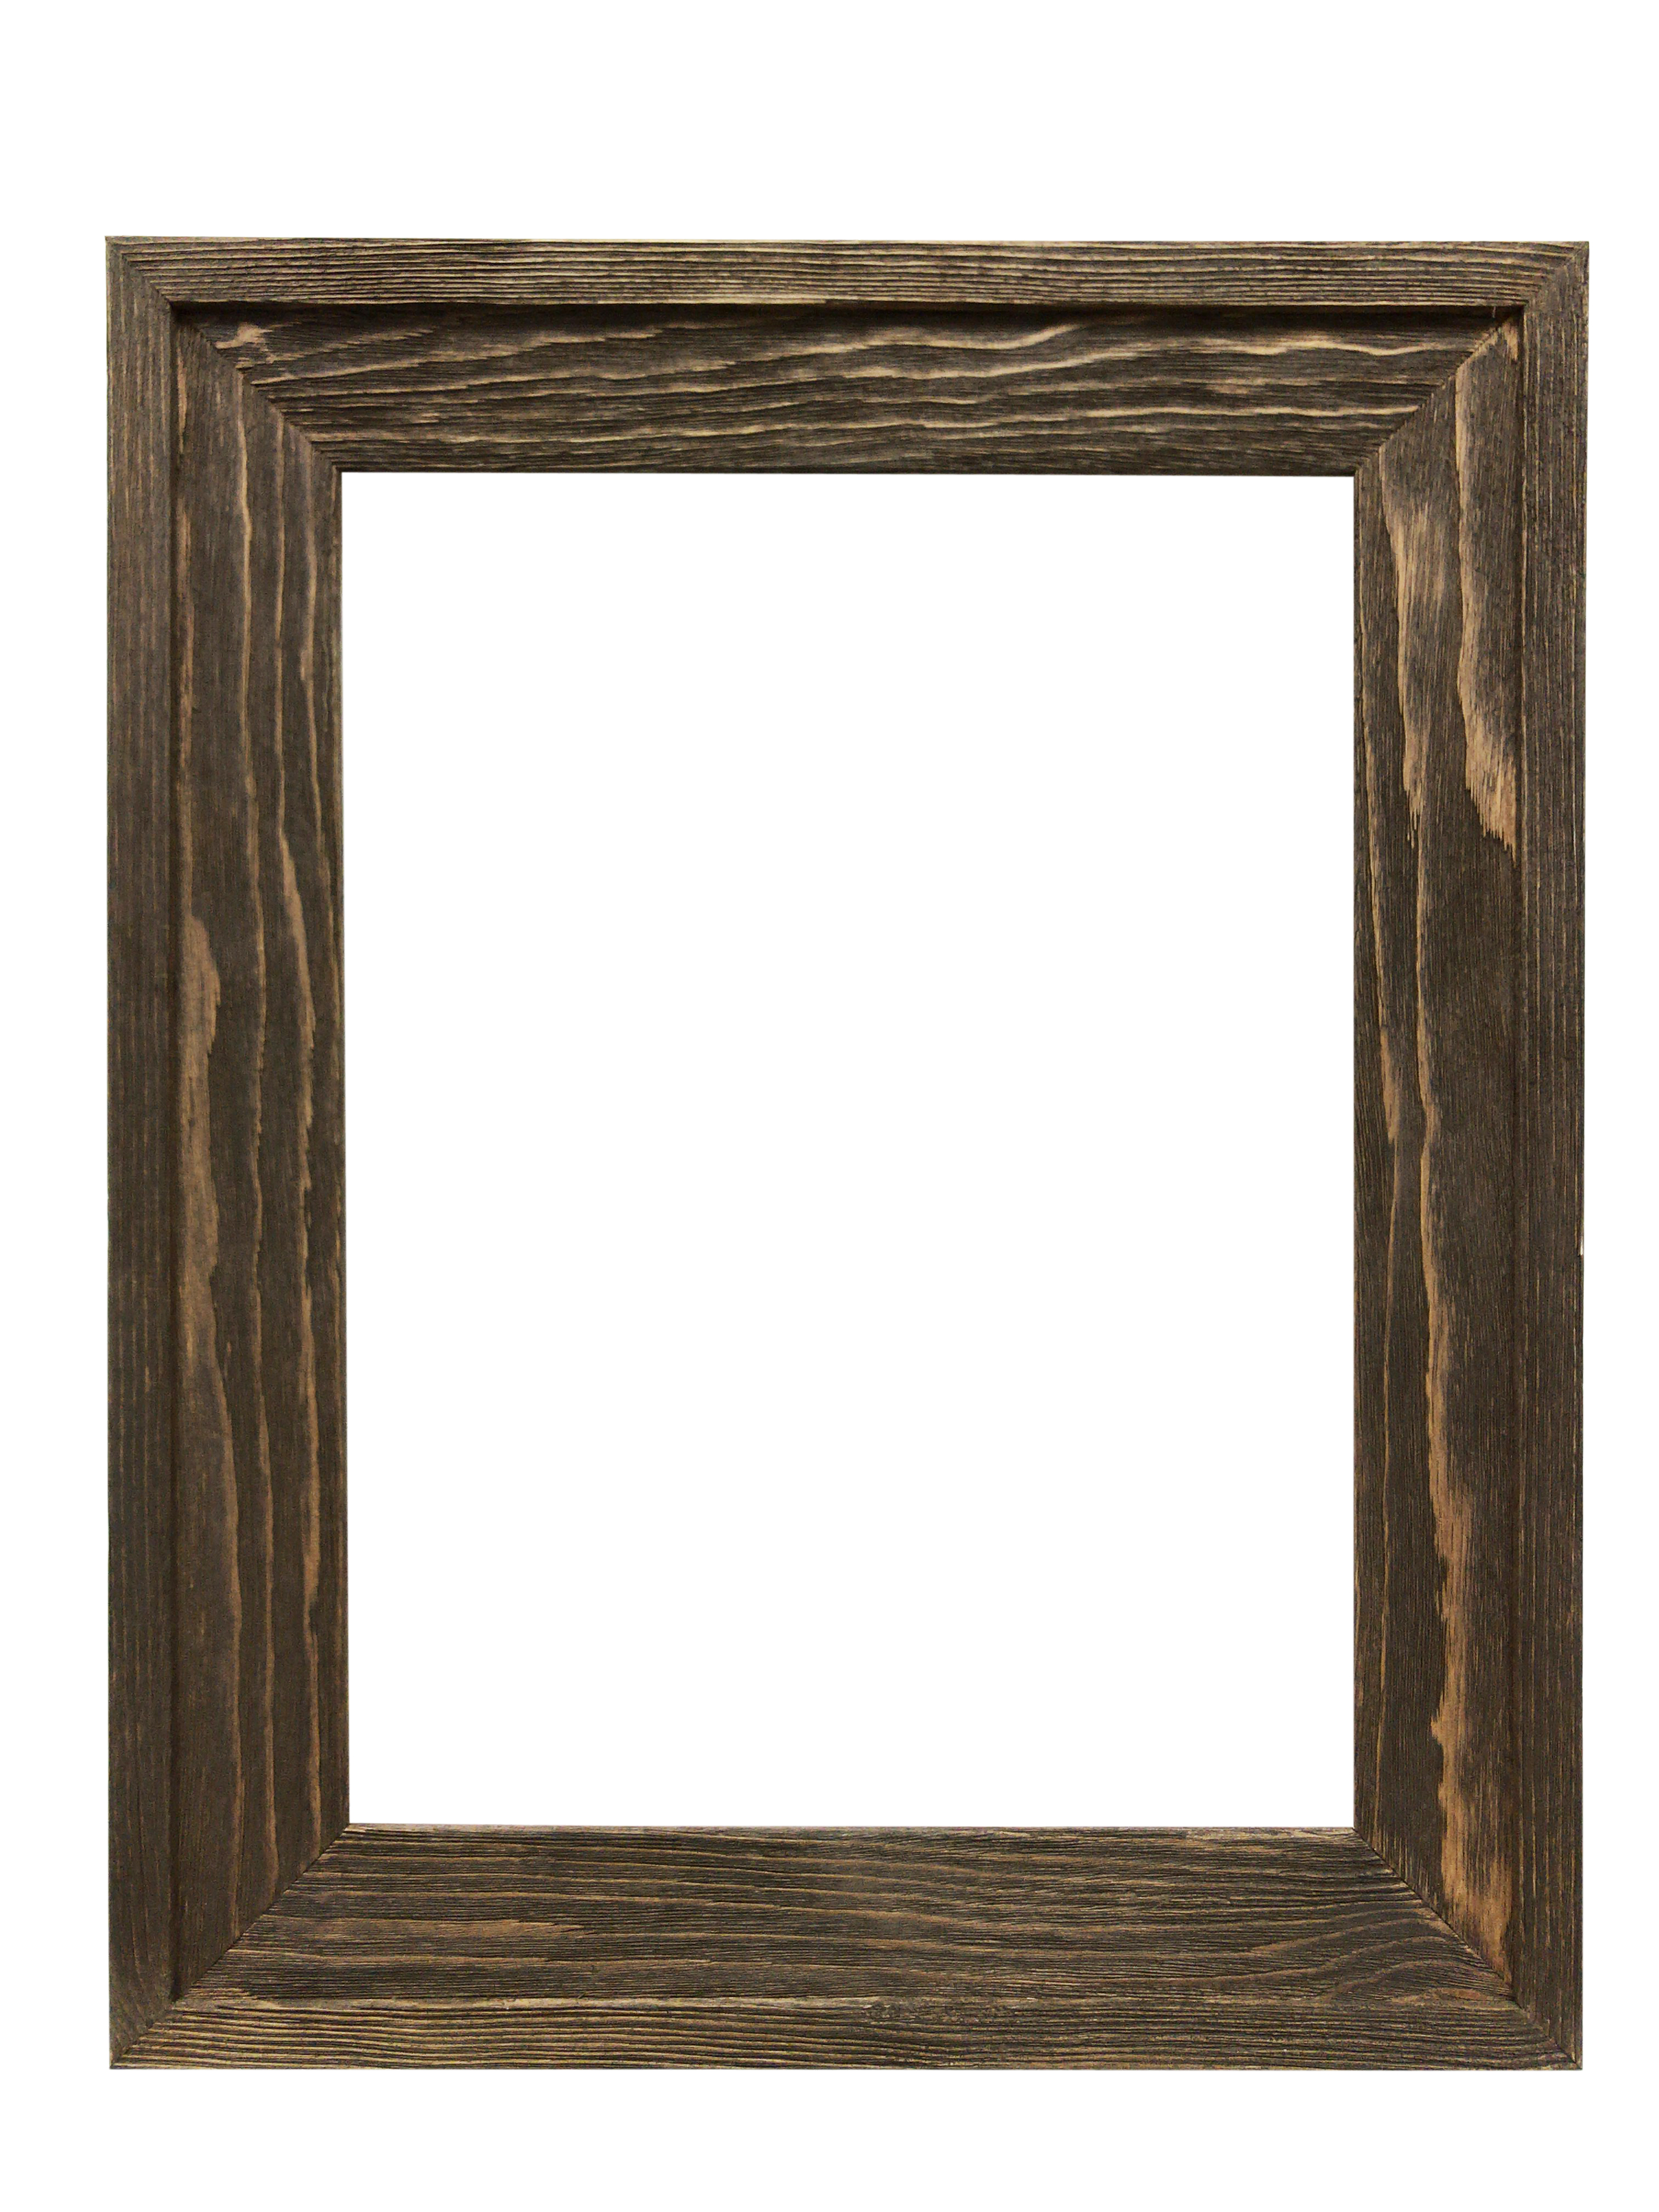 Details about    Hard to Find Size  12" x 24" Italian Tuscany Rustic Mahogany Picture Frame. 